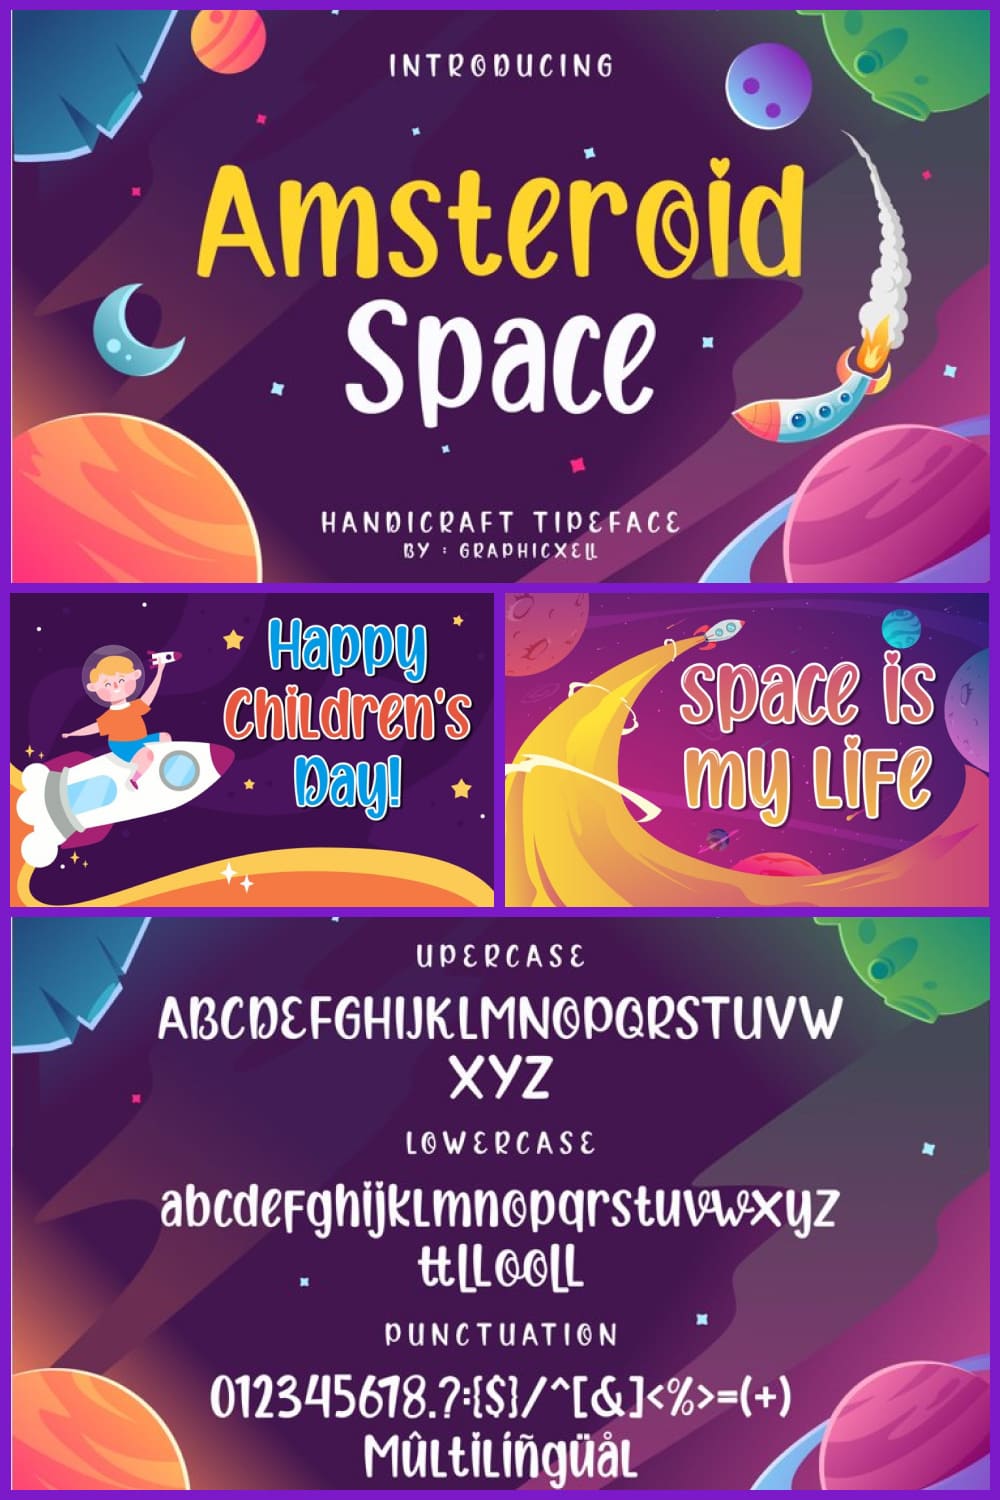 Childish font on a background with space theme.